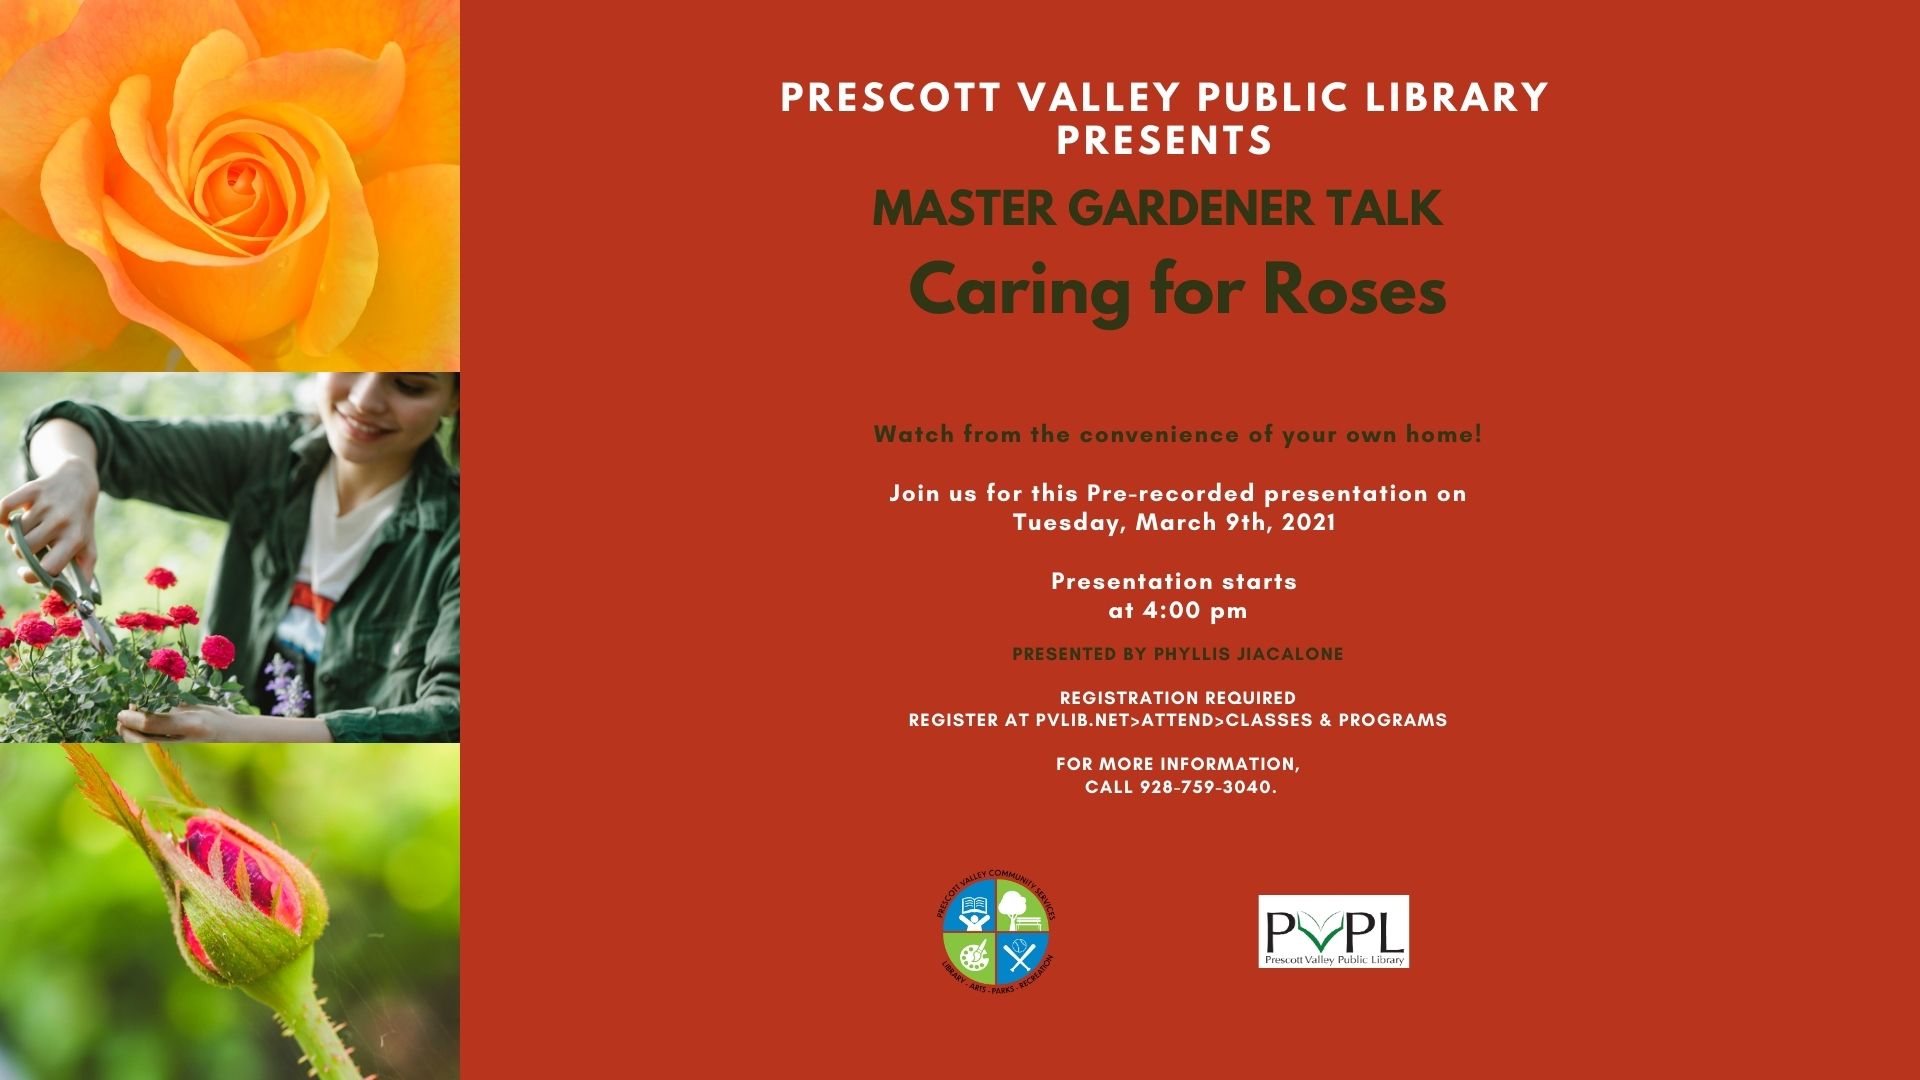 March 9th, 2021 Master Gardener: Caring for Roses – Registration Required – Virtual Pre-recorded